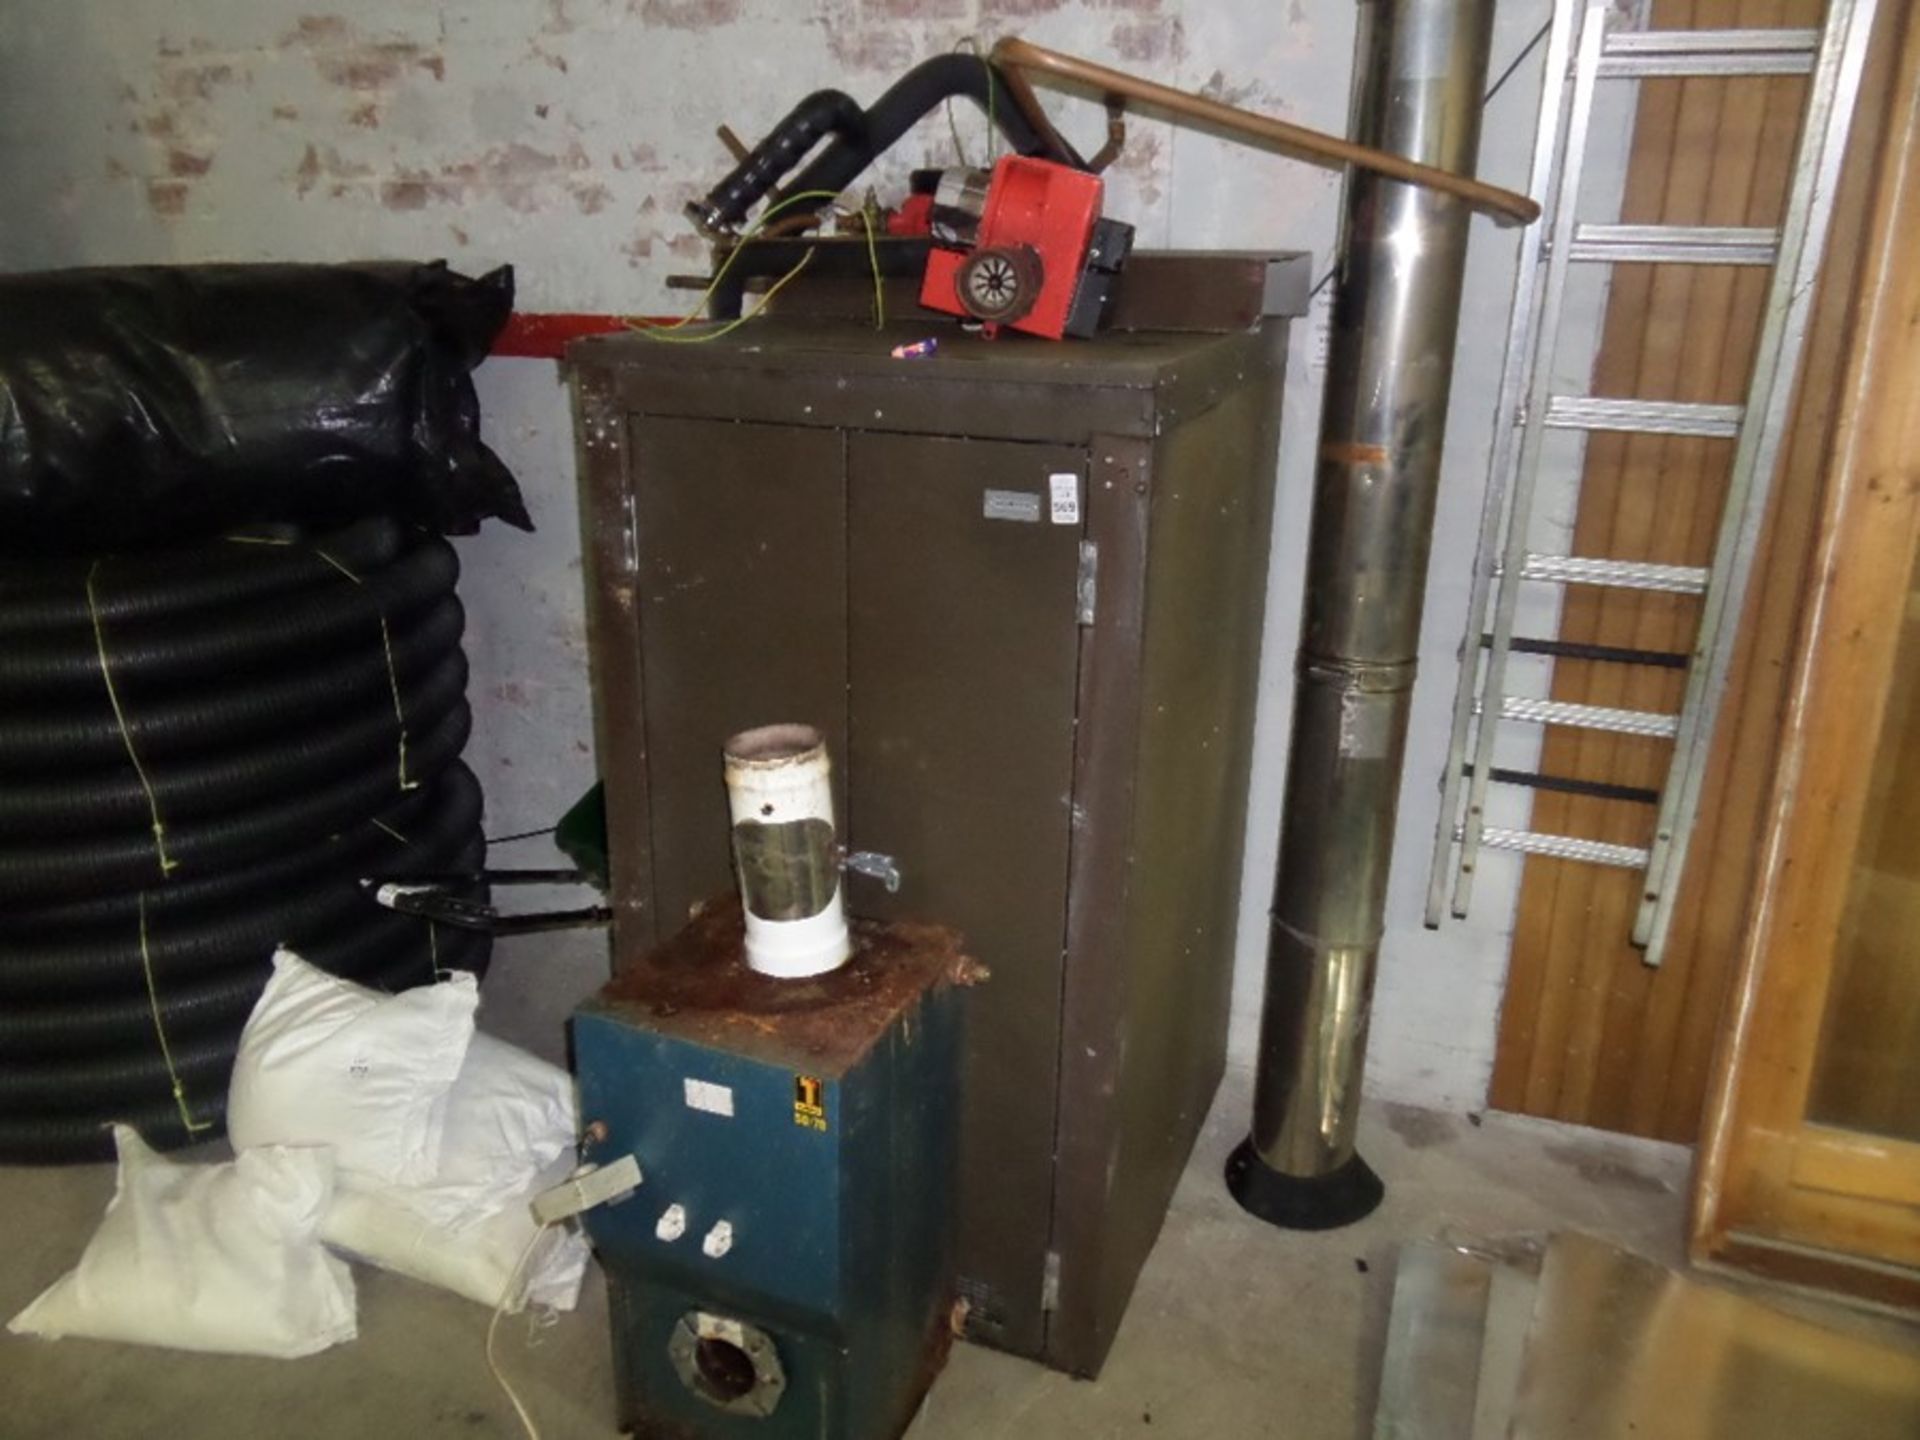 OIL FIRED CENTRAL HEATING BOILER (PIPEWORK PUMP CHIMNEY AND HOUSING ALSO)